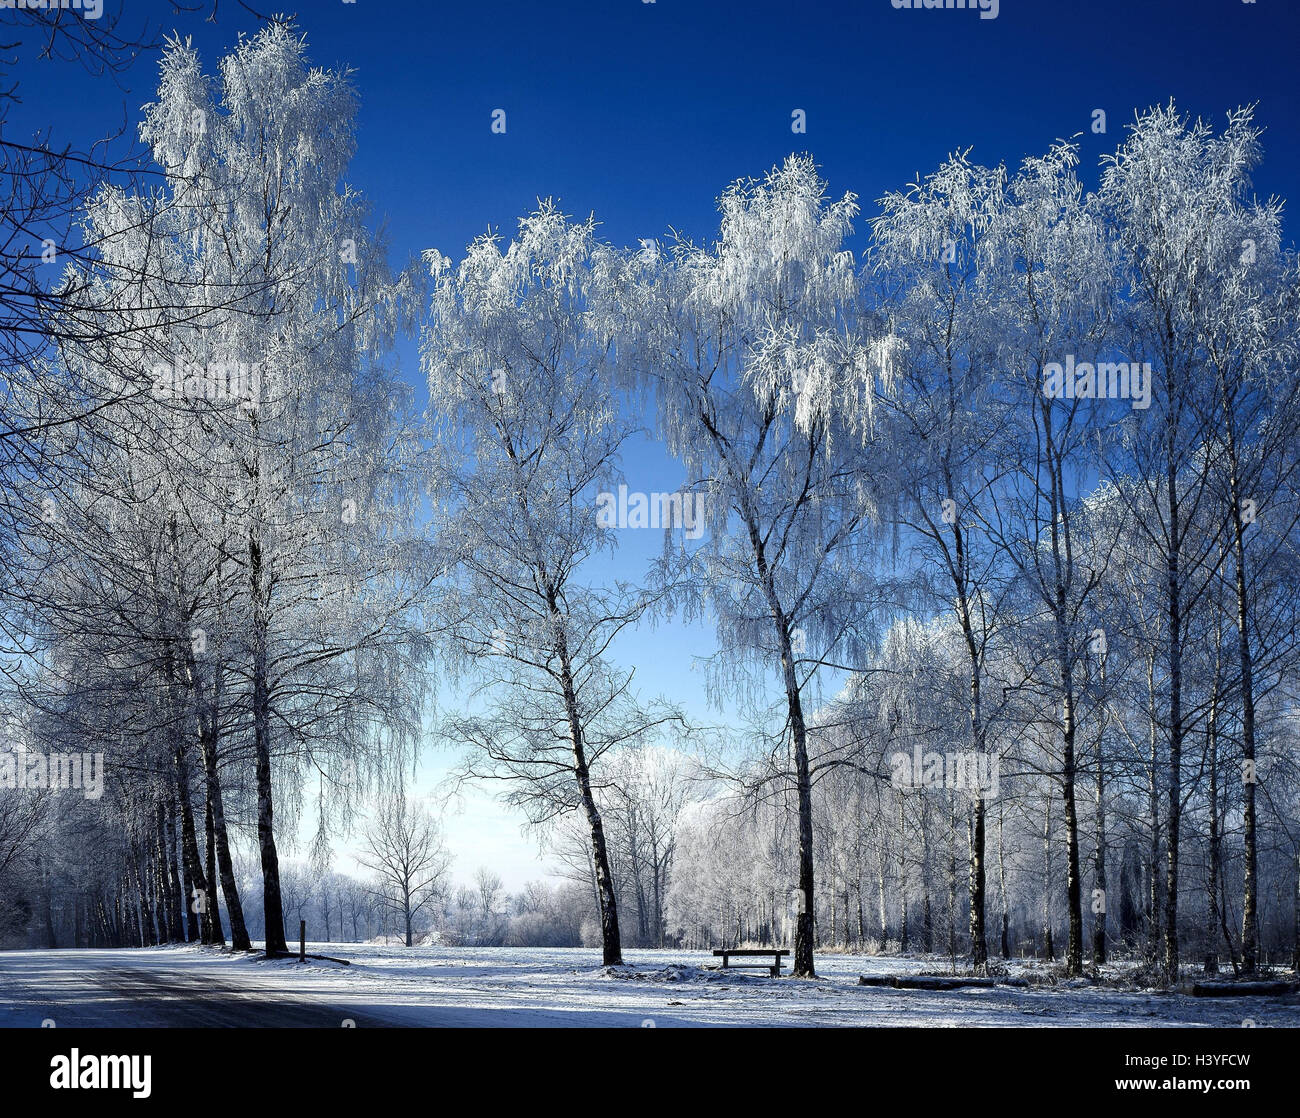 Germany, Upper Bavaria, game park, Poing, trees, hoarfrost, outside, Bavaria, park, nature reserve, park, meadow, winter, maturity, coldly, cold, nature, winter scenery Stock Photo